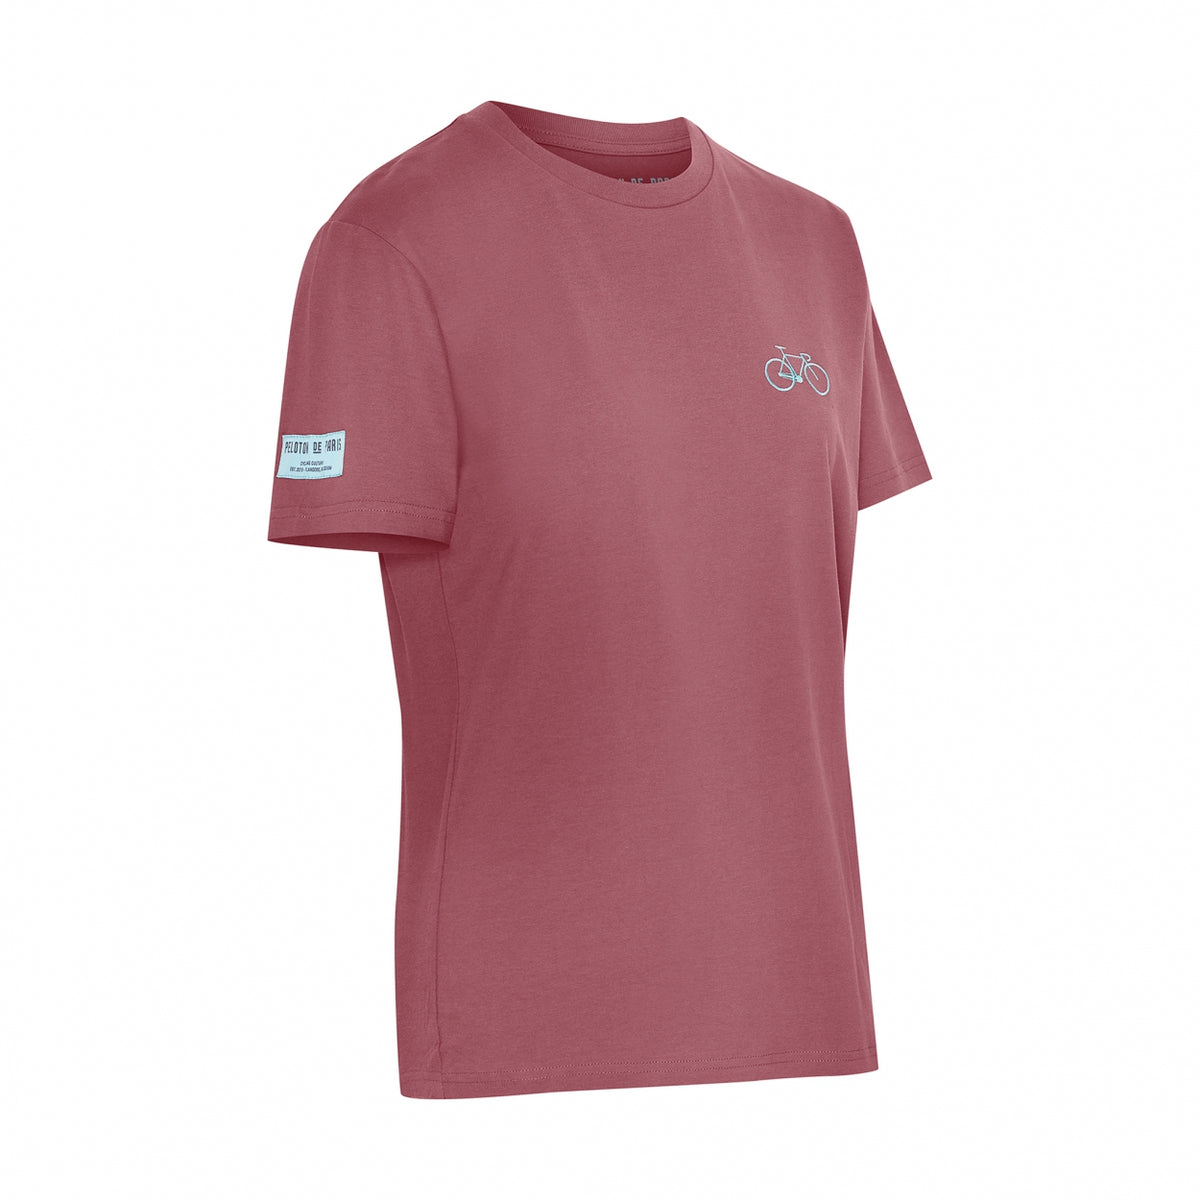 Bike T-Shirt Embroidered | Rose